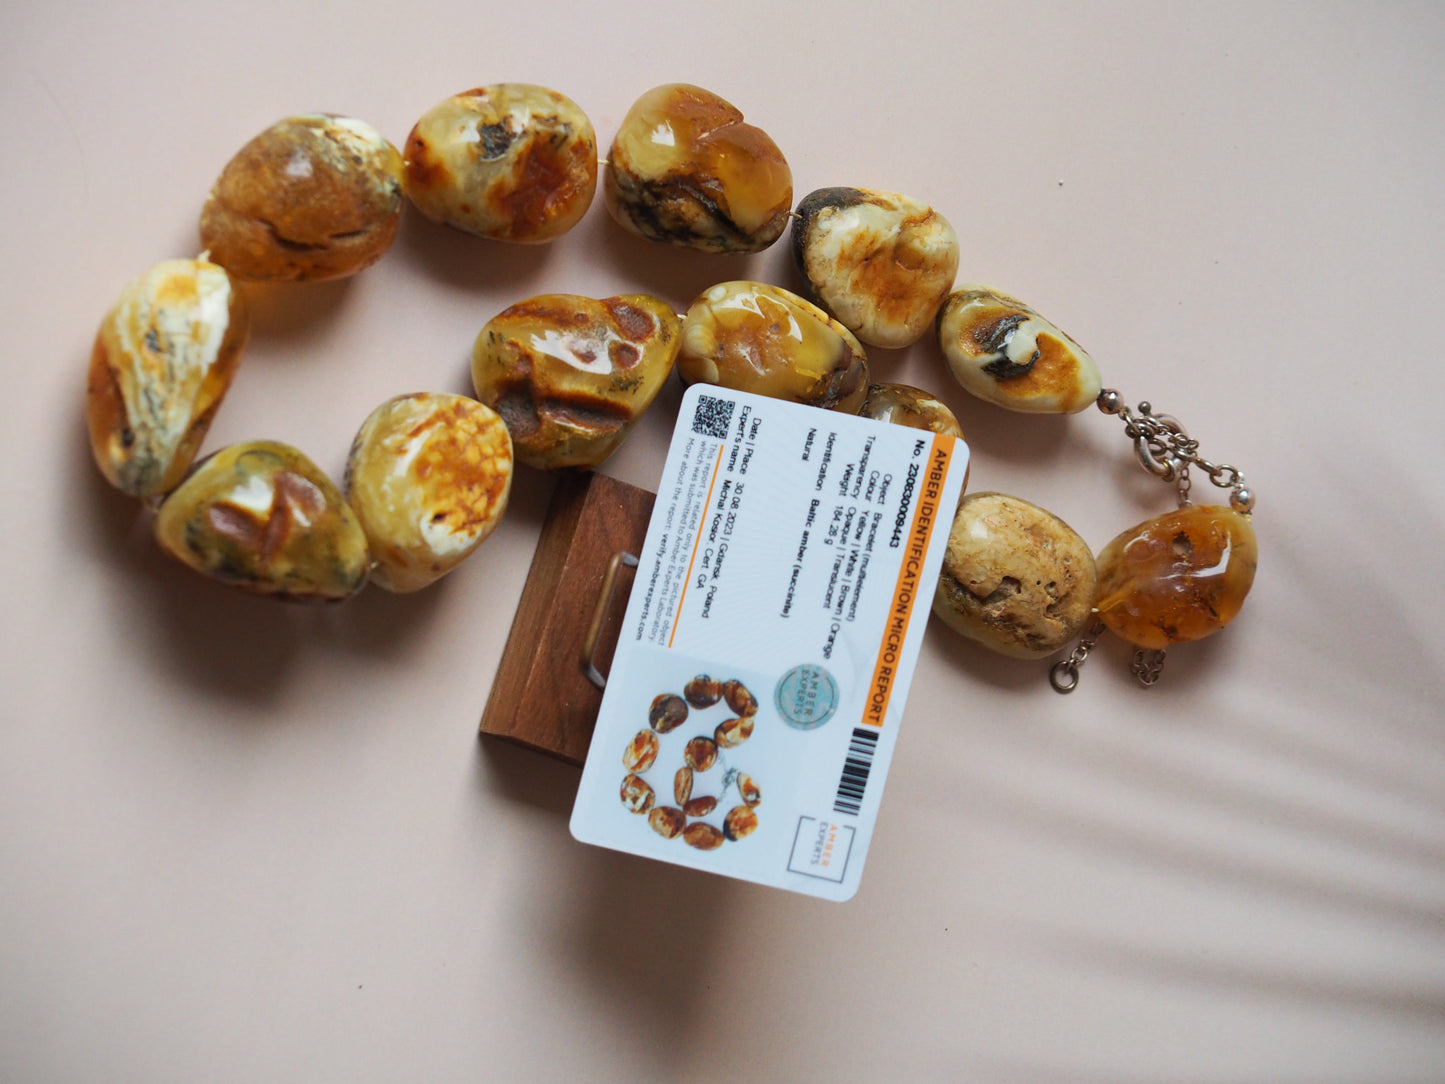 Huge and Unique Raw Amber Necklace from Private Collector from Poland 1970s with Certificate